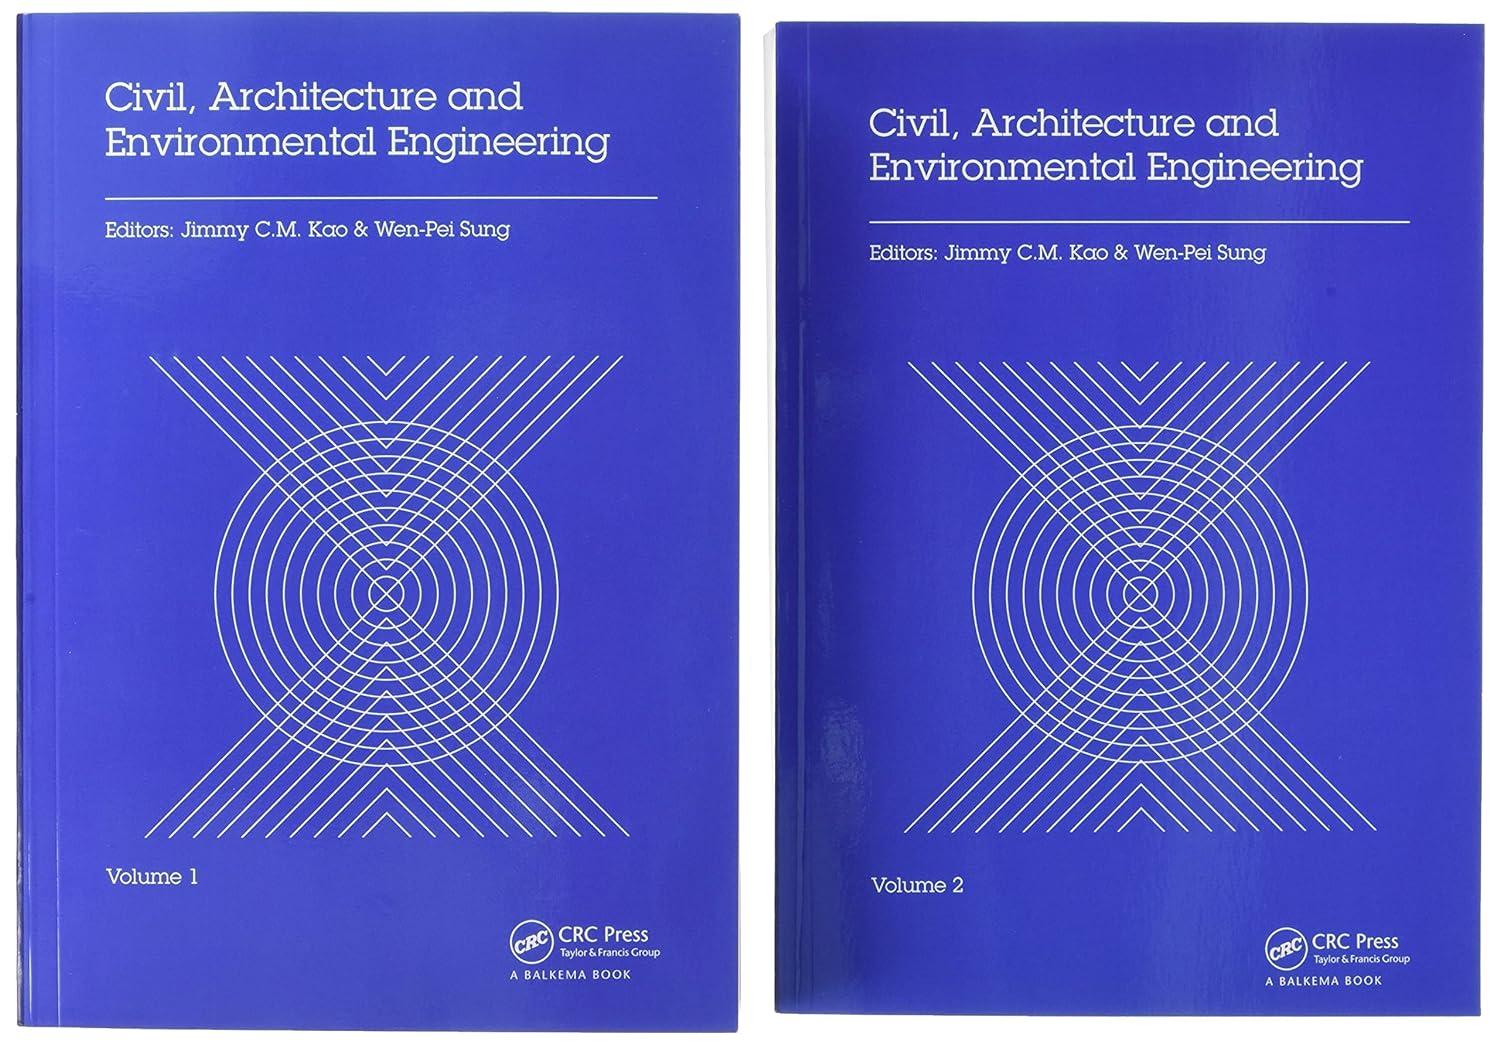 civil architecture and environmental engineering vol: 1,2 1st edition jimmy c.m. kao, wen-pei sung